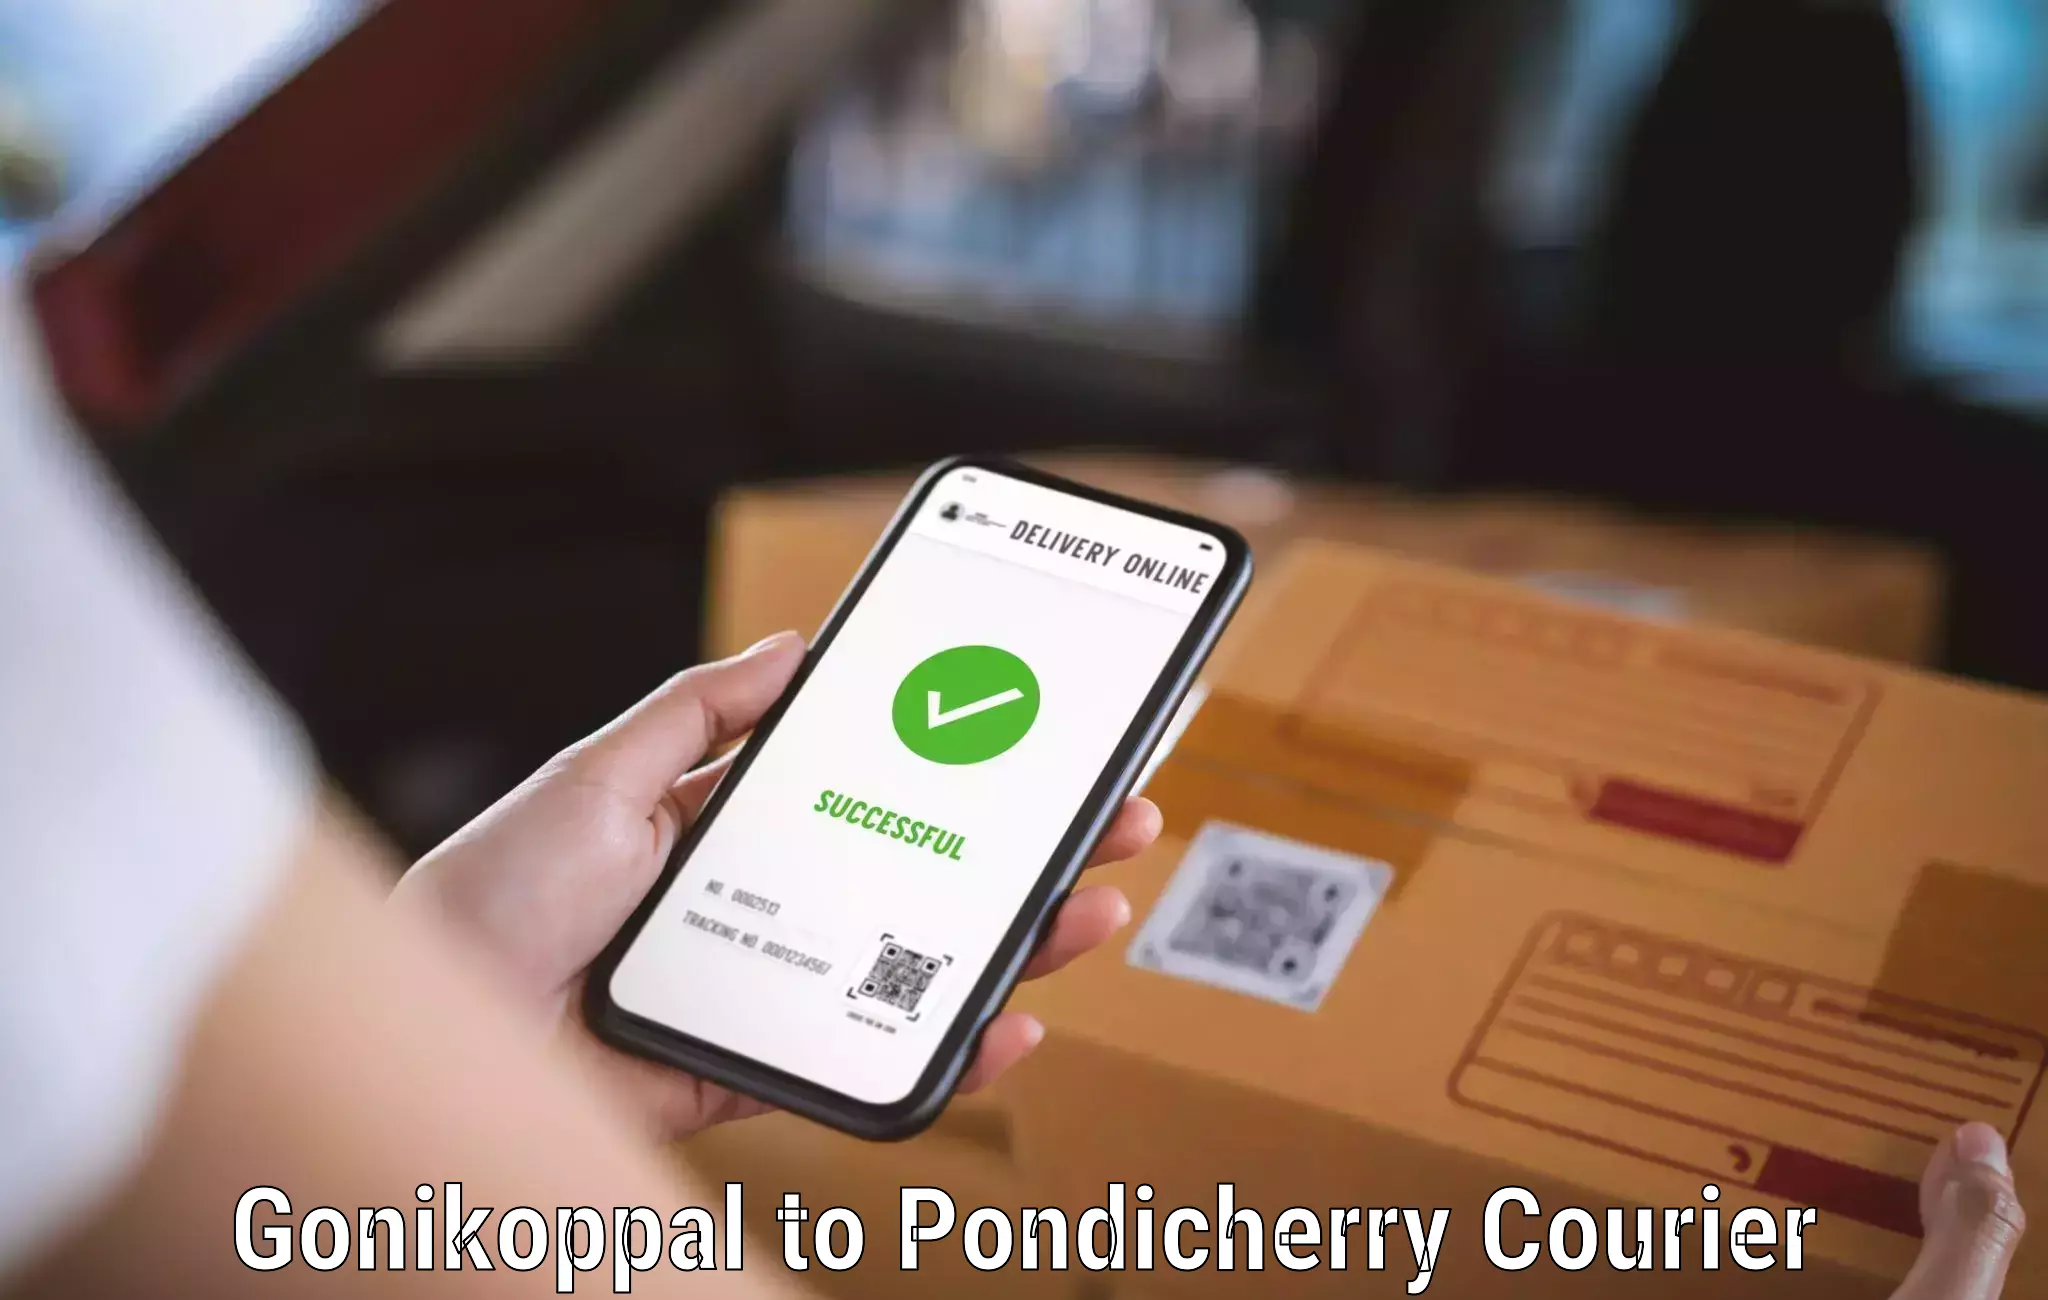 Rural area delivery Gonikoppal to Pondicherry